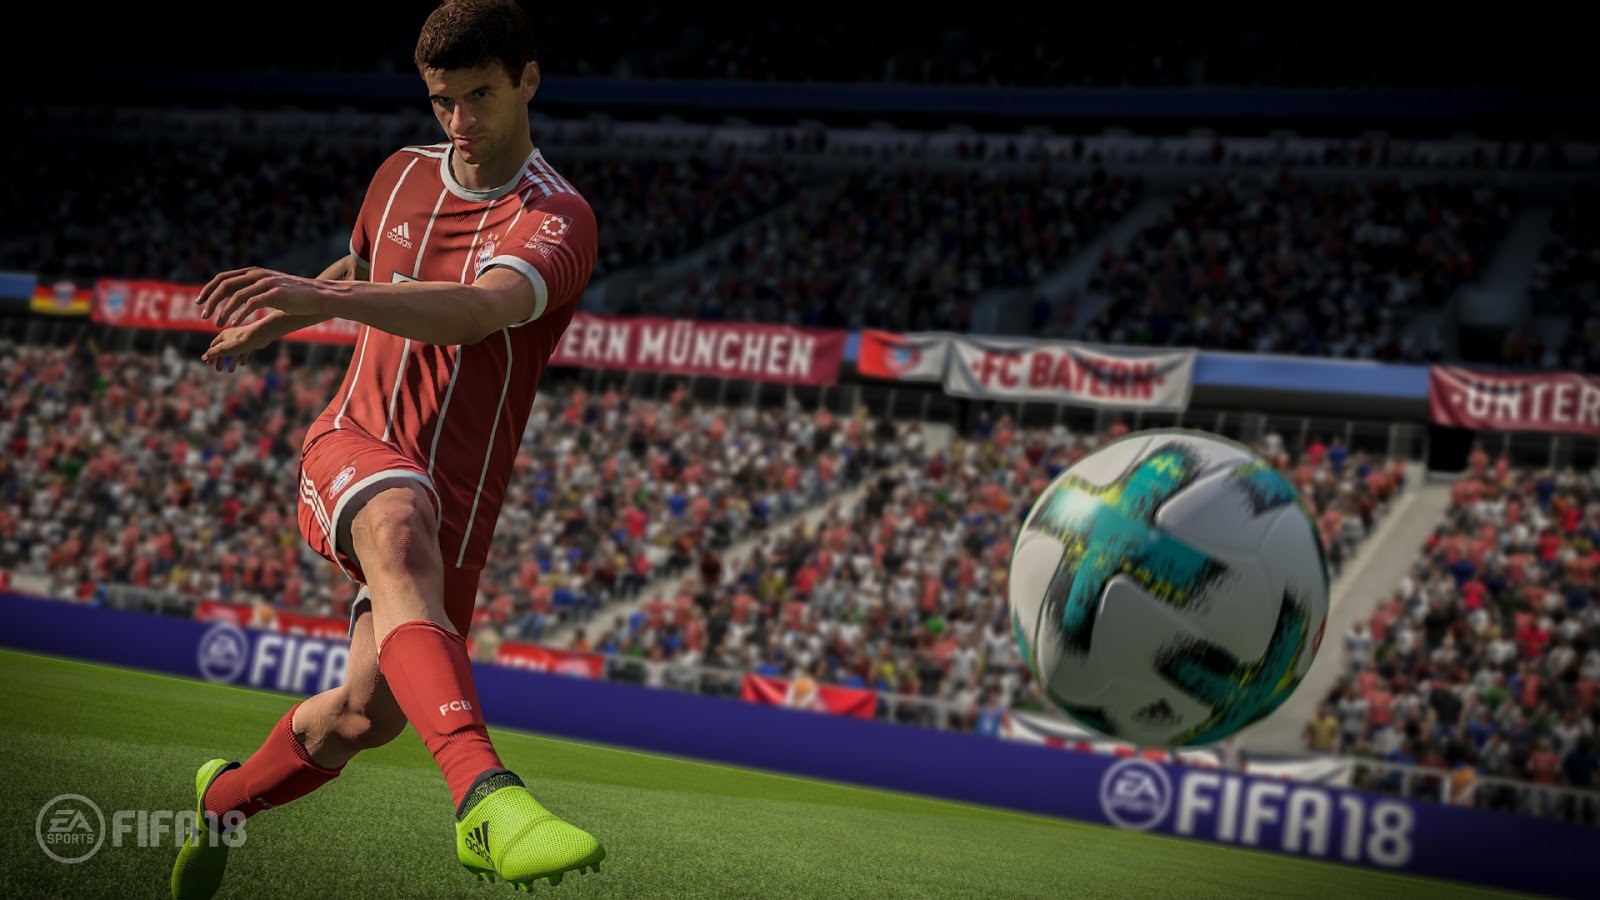 Download FIFA+  Football entertainment on PC with MEmu